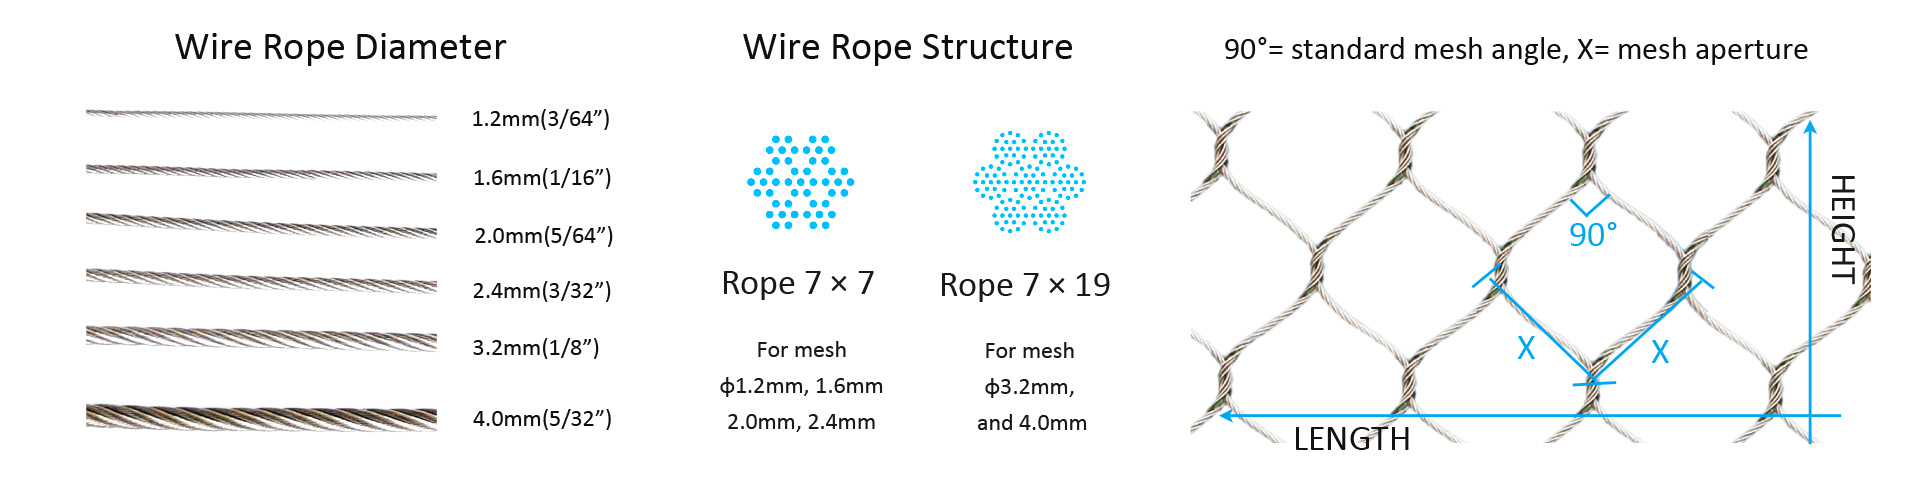 details of wire rope mesh